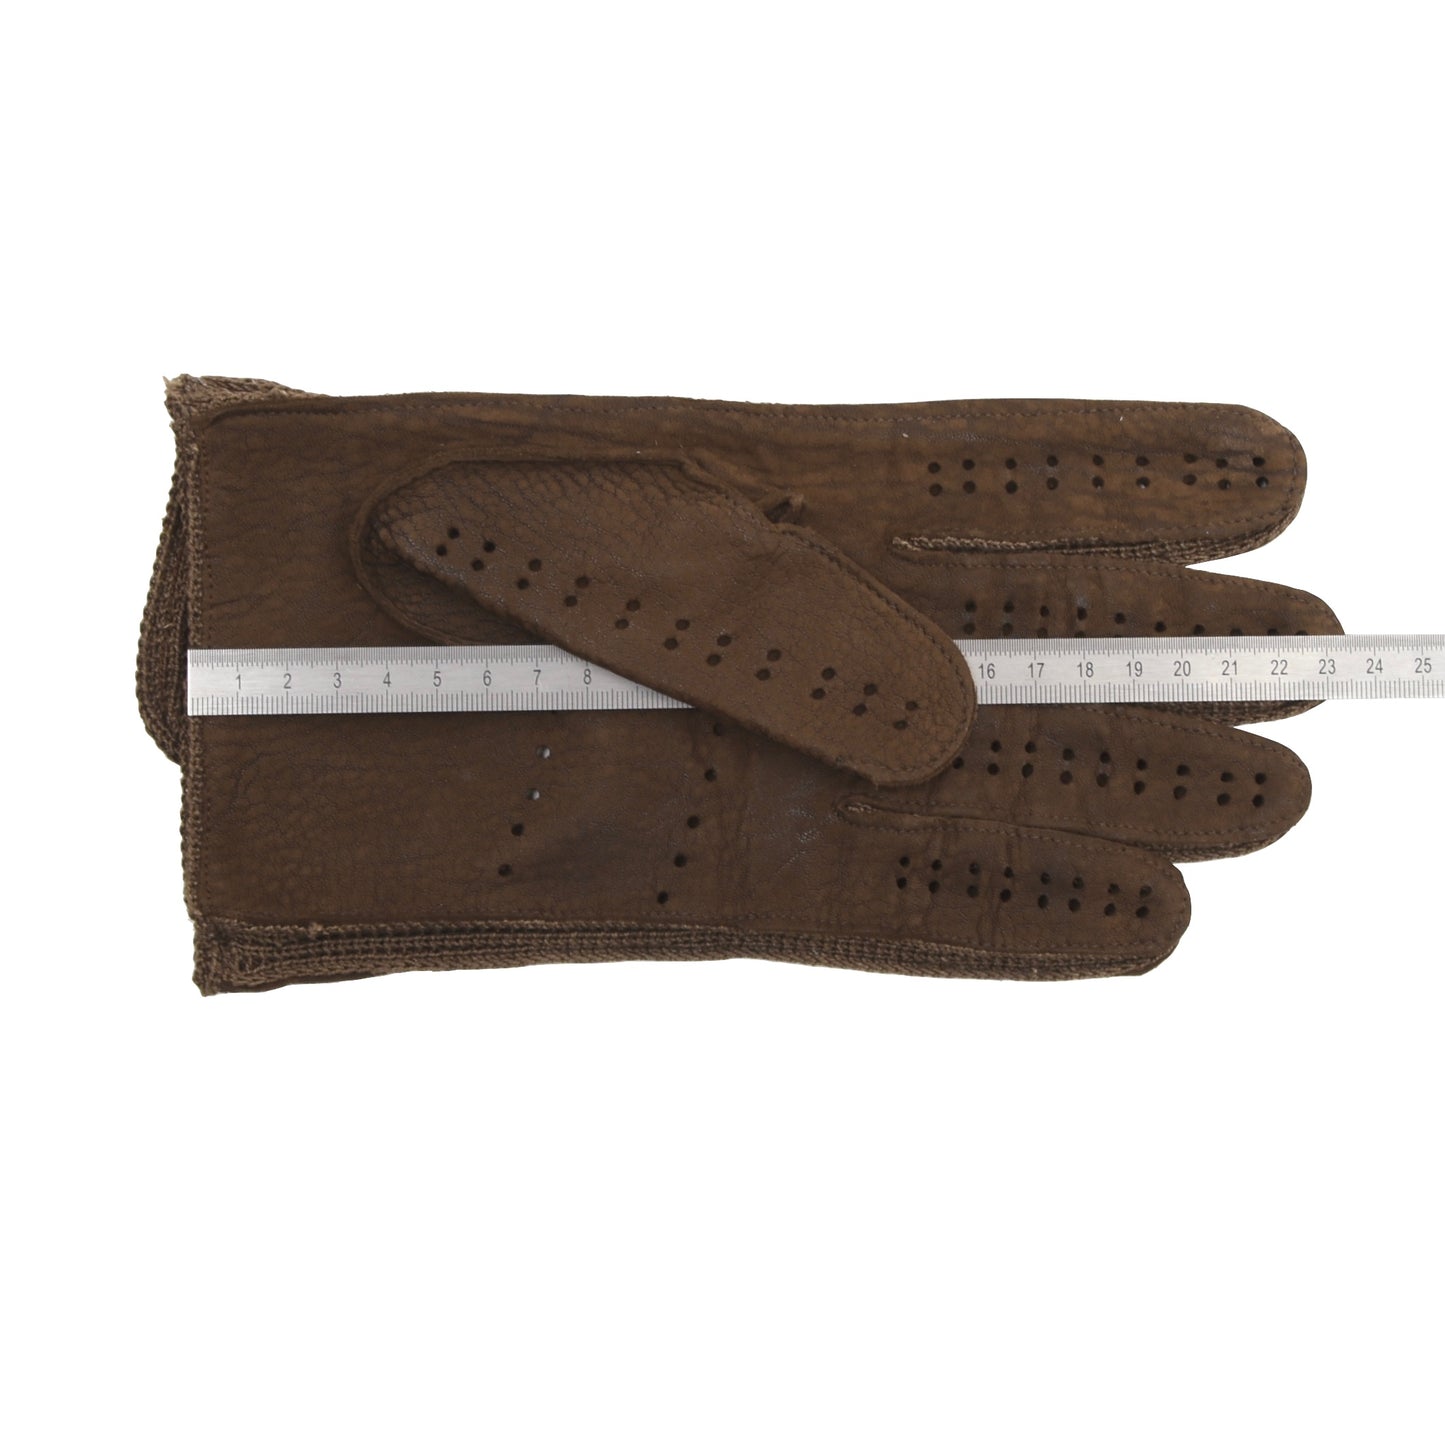 Carpincho Unlined Leather Driving Gloves Size 9.5 - Brown